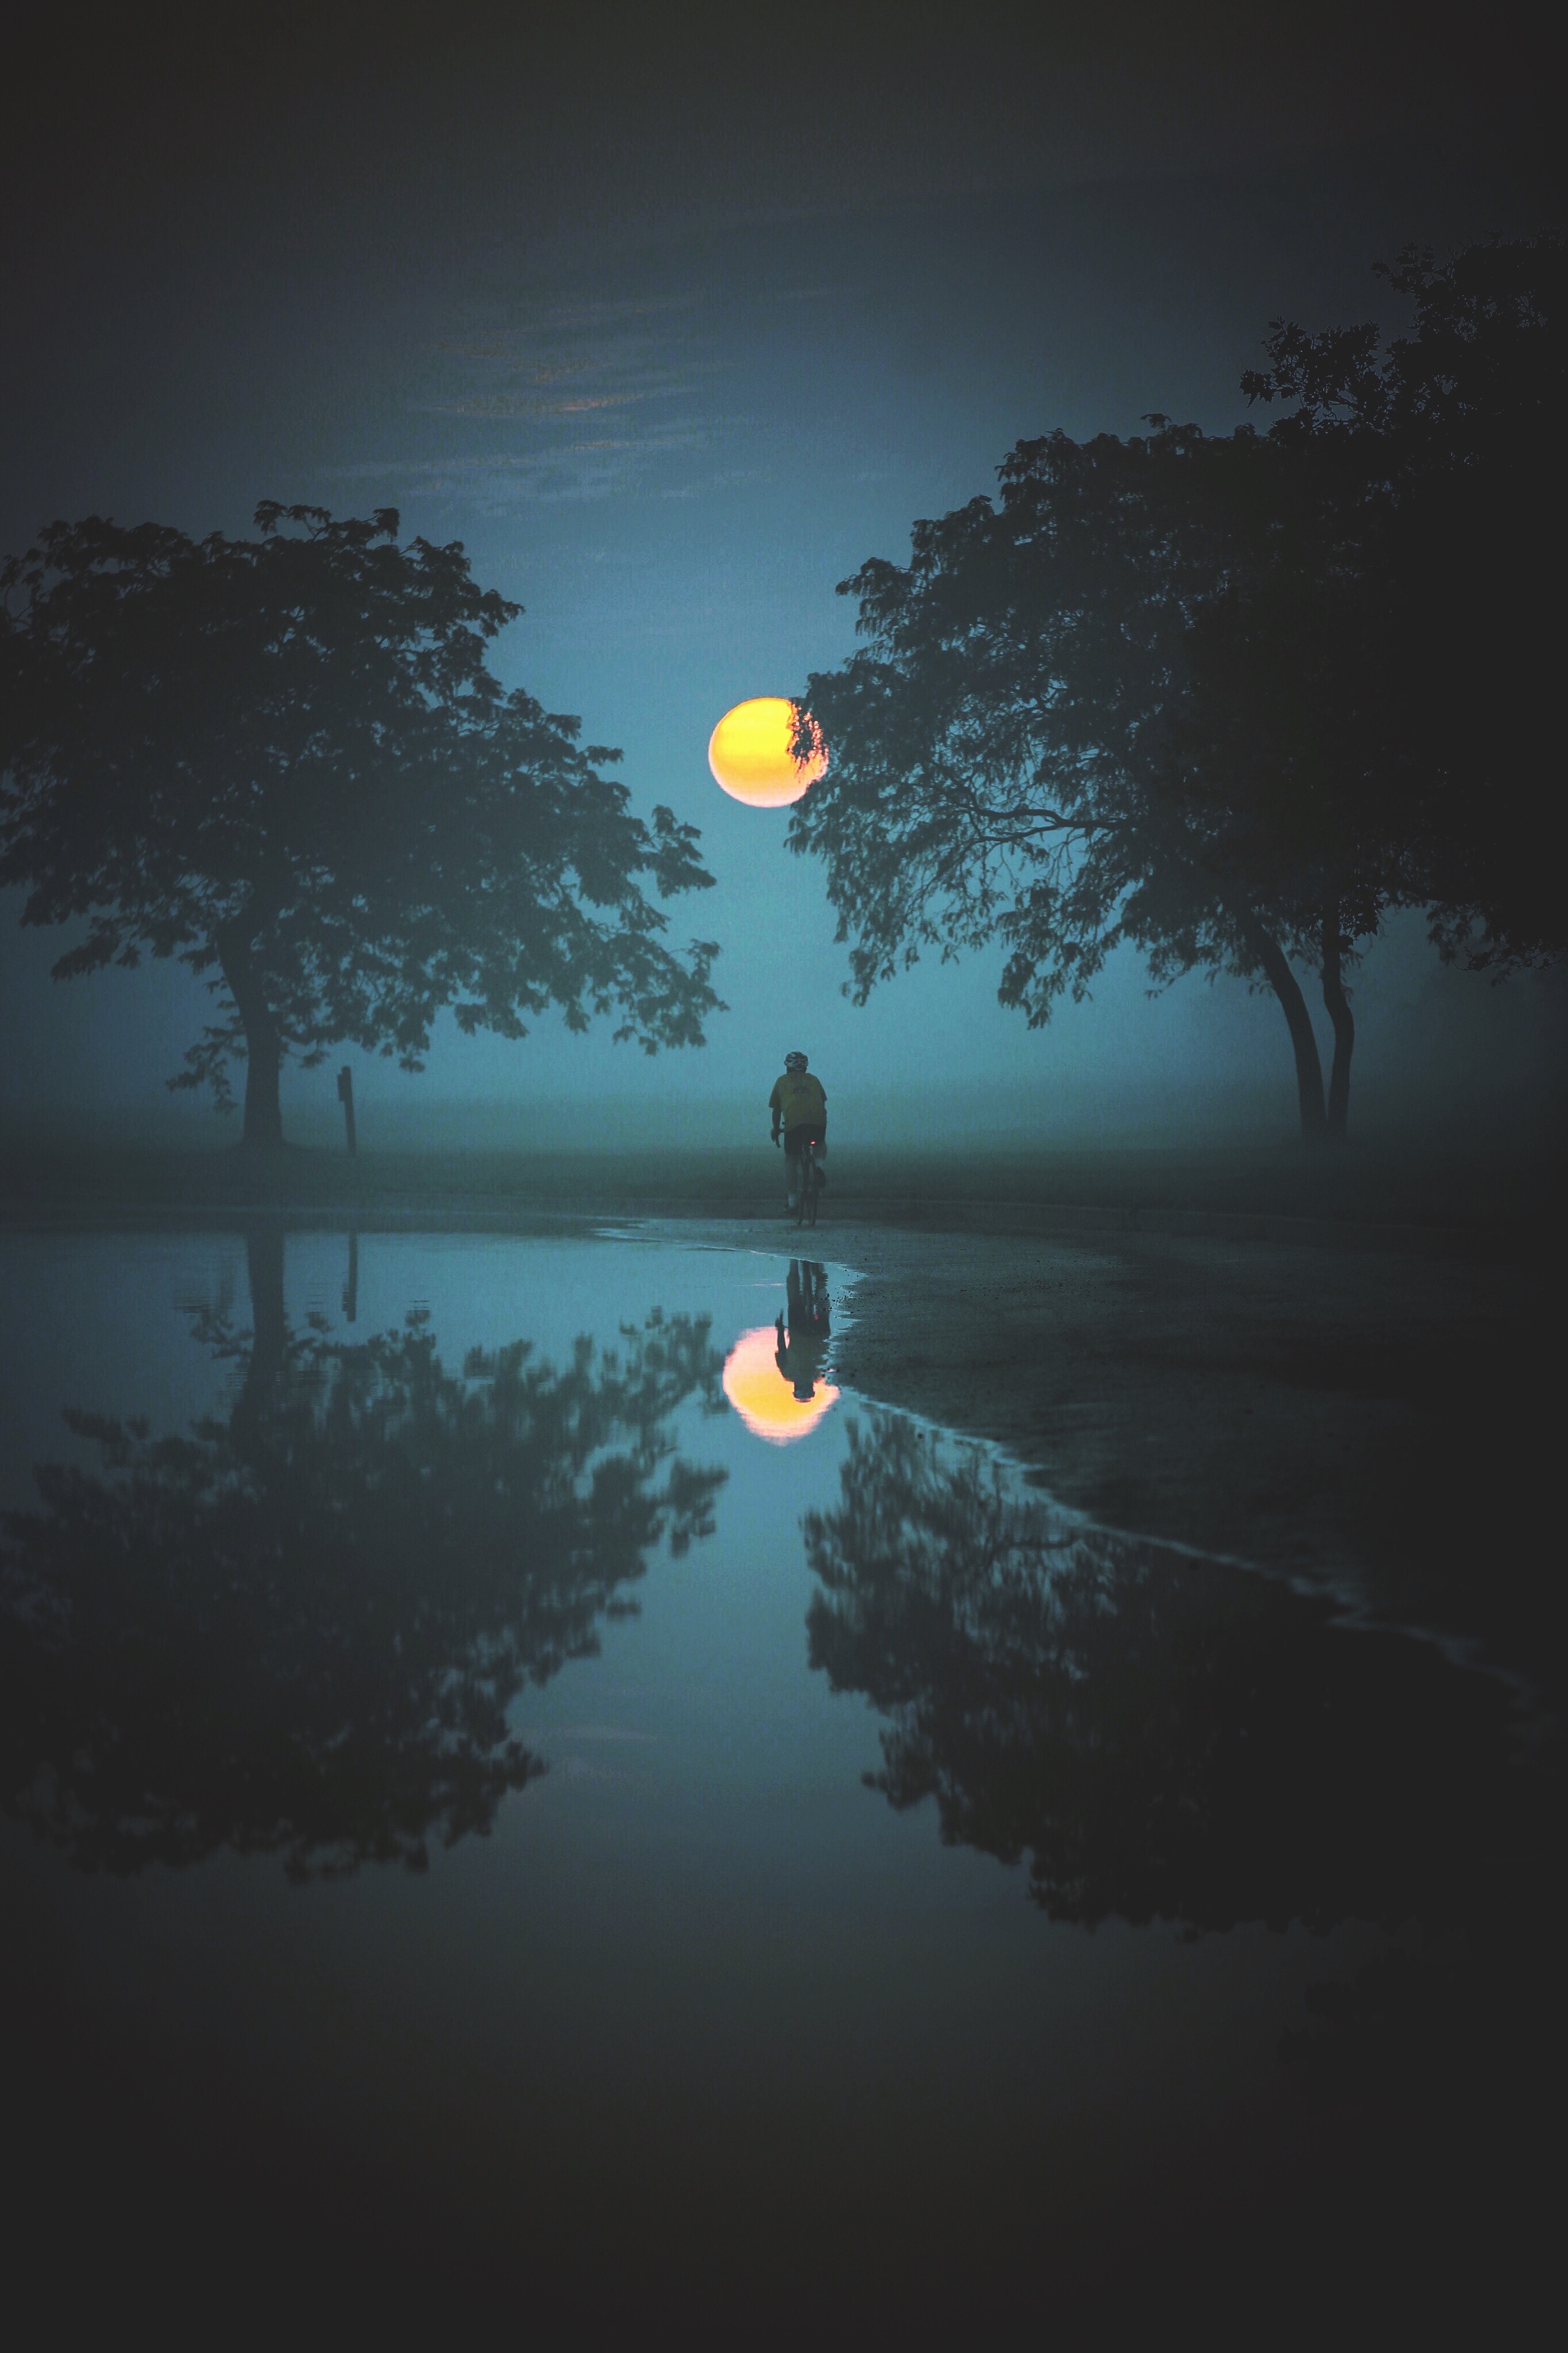 nighttime moon photo with man and moon reflected in pool of water